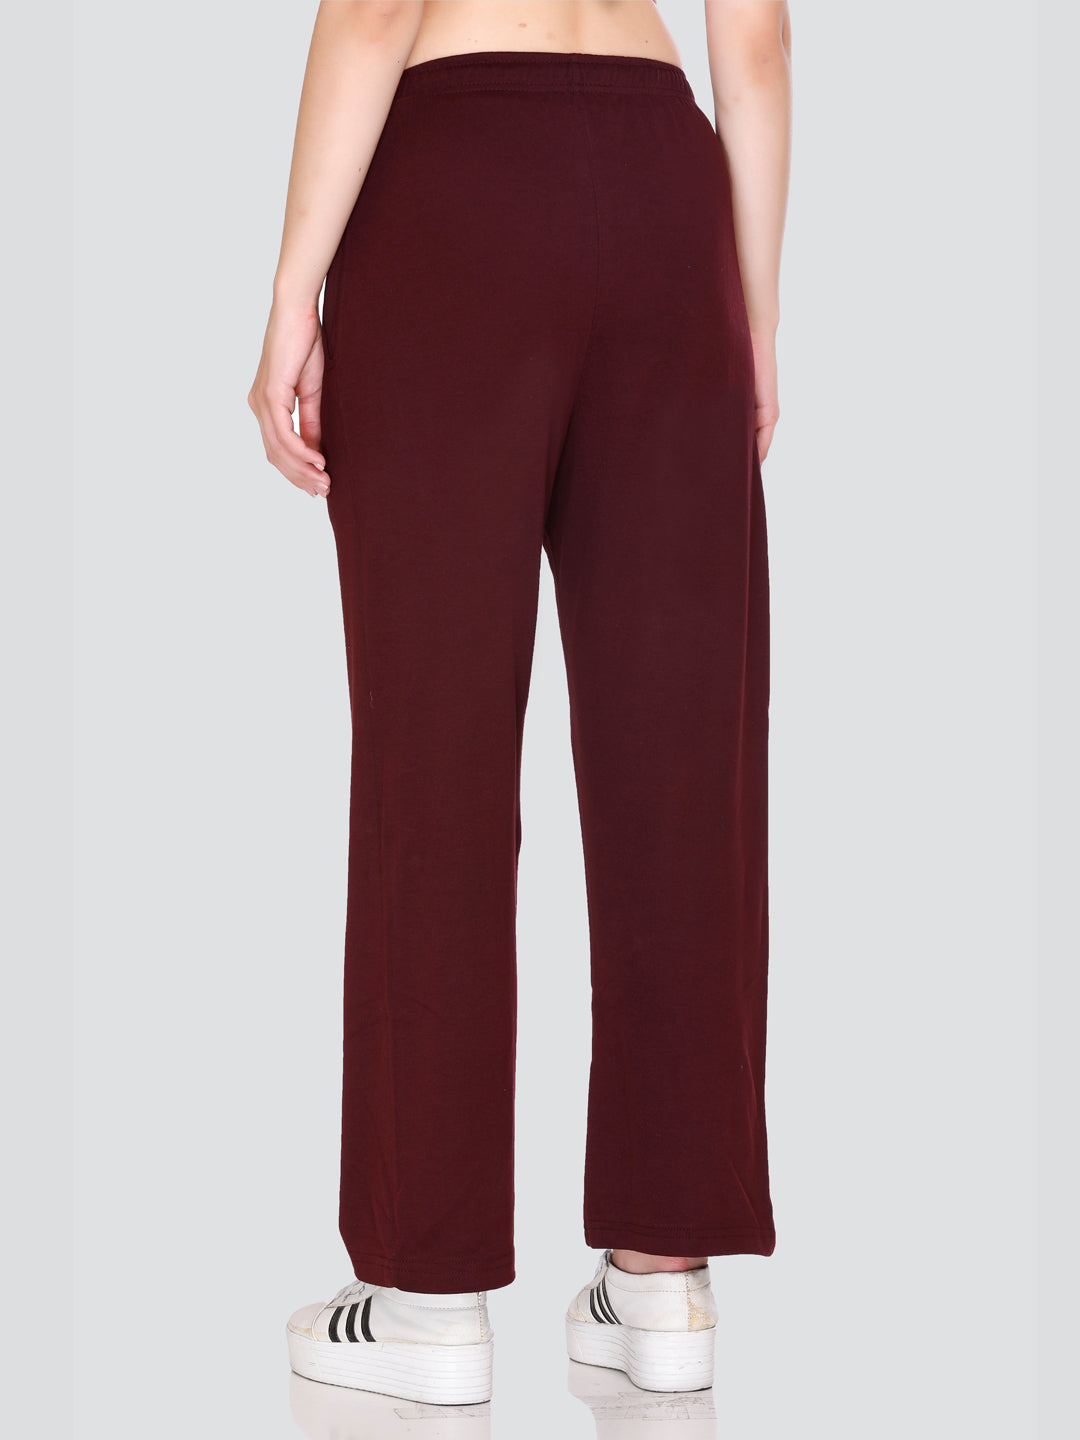 Comfortable High Waist Cotton Flared Pants For Women in Wine online at best prices